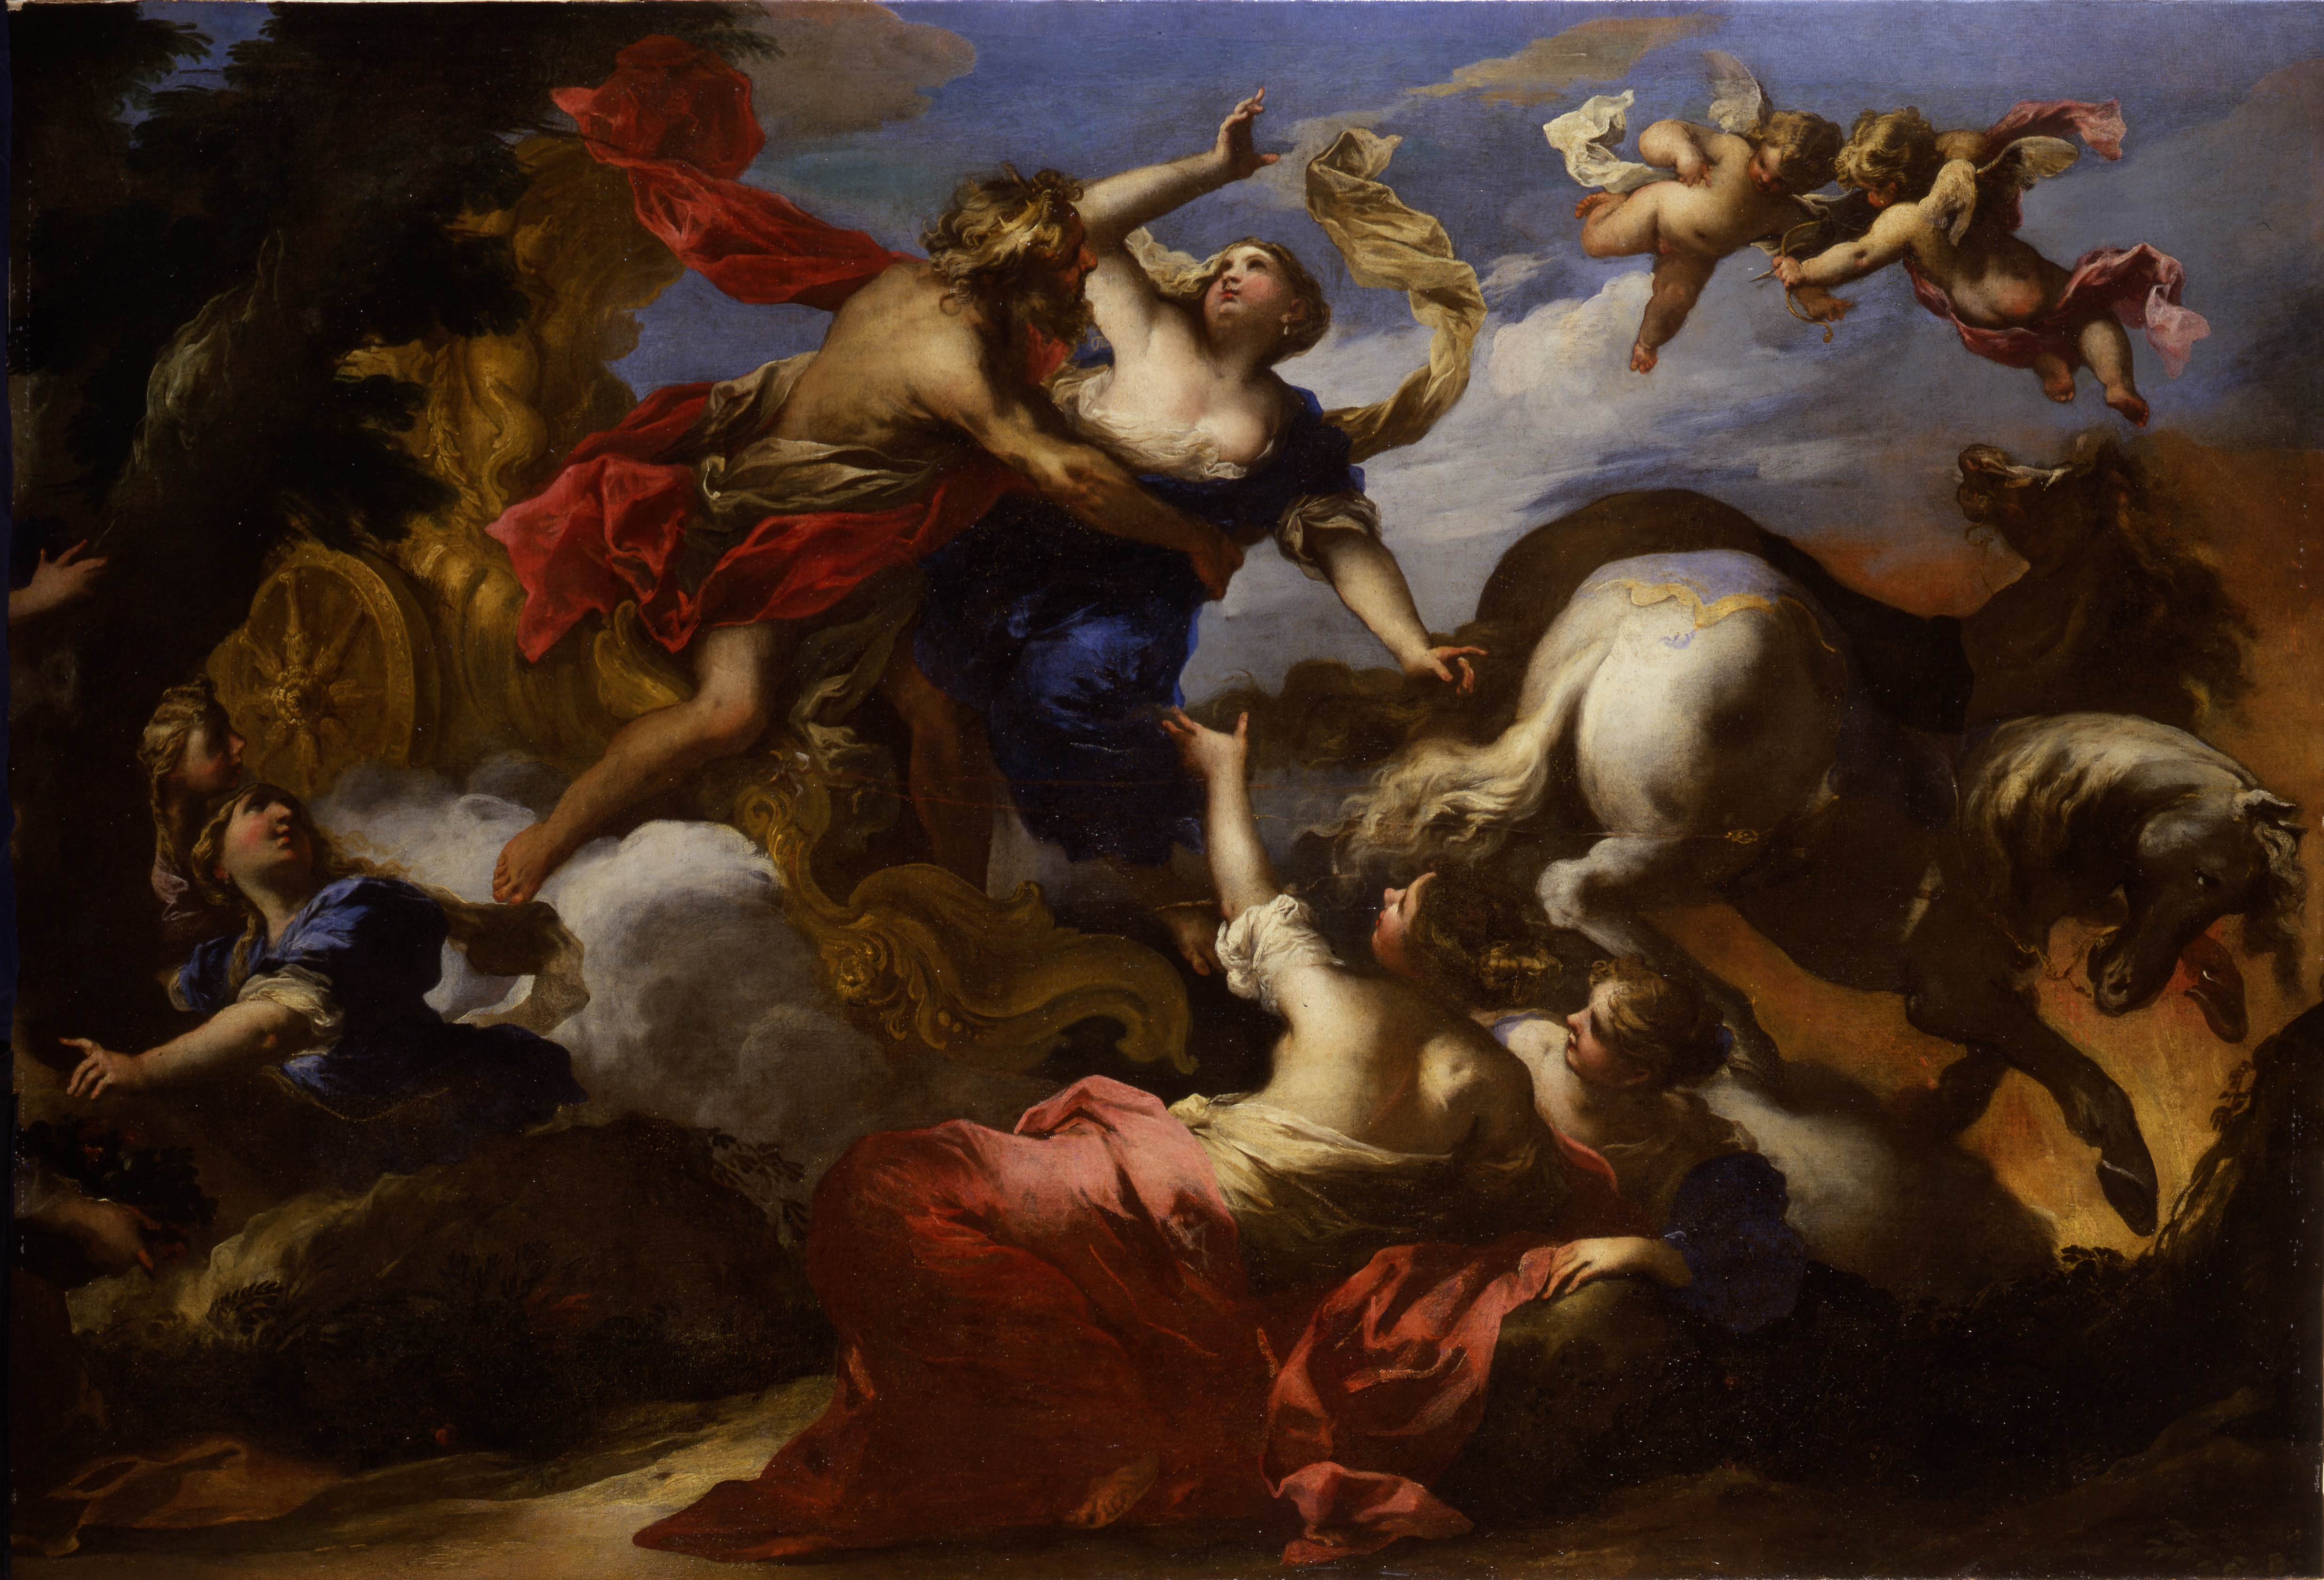 The Abduction of Proserpine